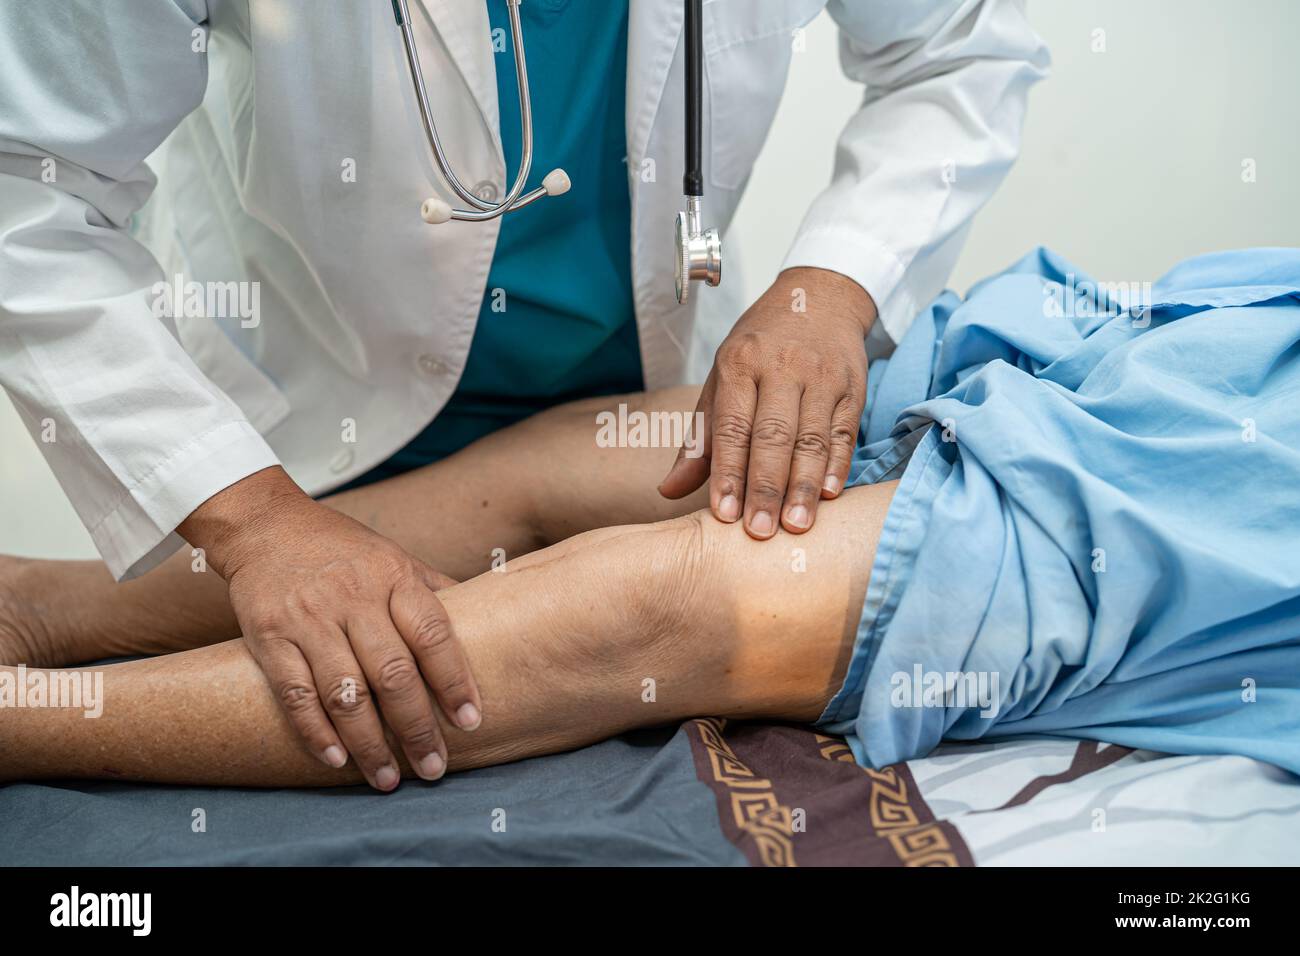 Asian doctor physiotherapist examining, massaging and treatment knee and leg of senior patient in orthopedist medical clinic nurse hospital. Stock Photo